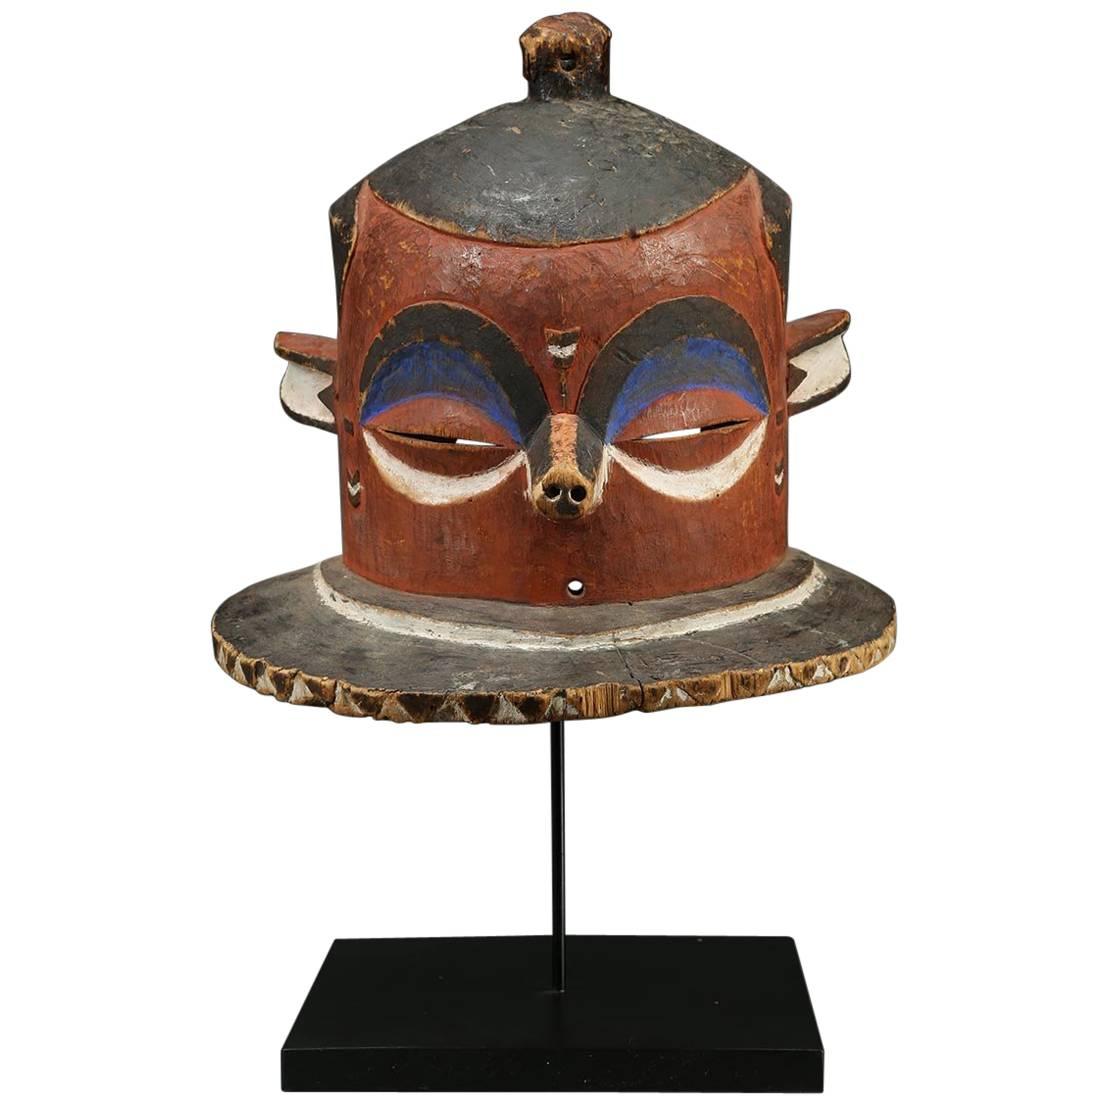 Pende "Giphogo" Tribal Helmet Mask, Democratic Republic of Congo, Red and Black